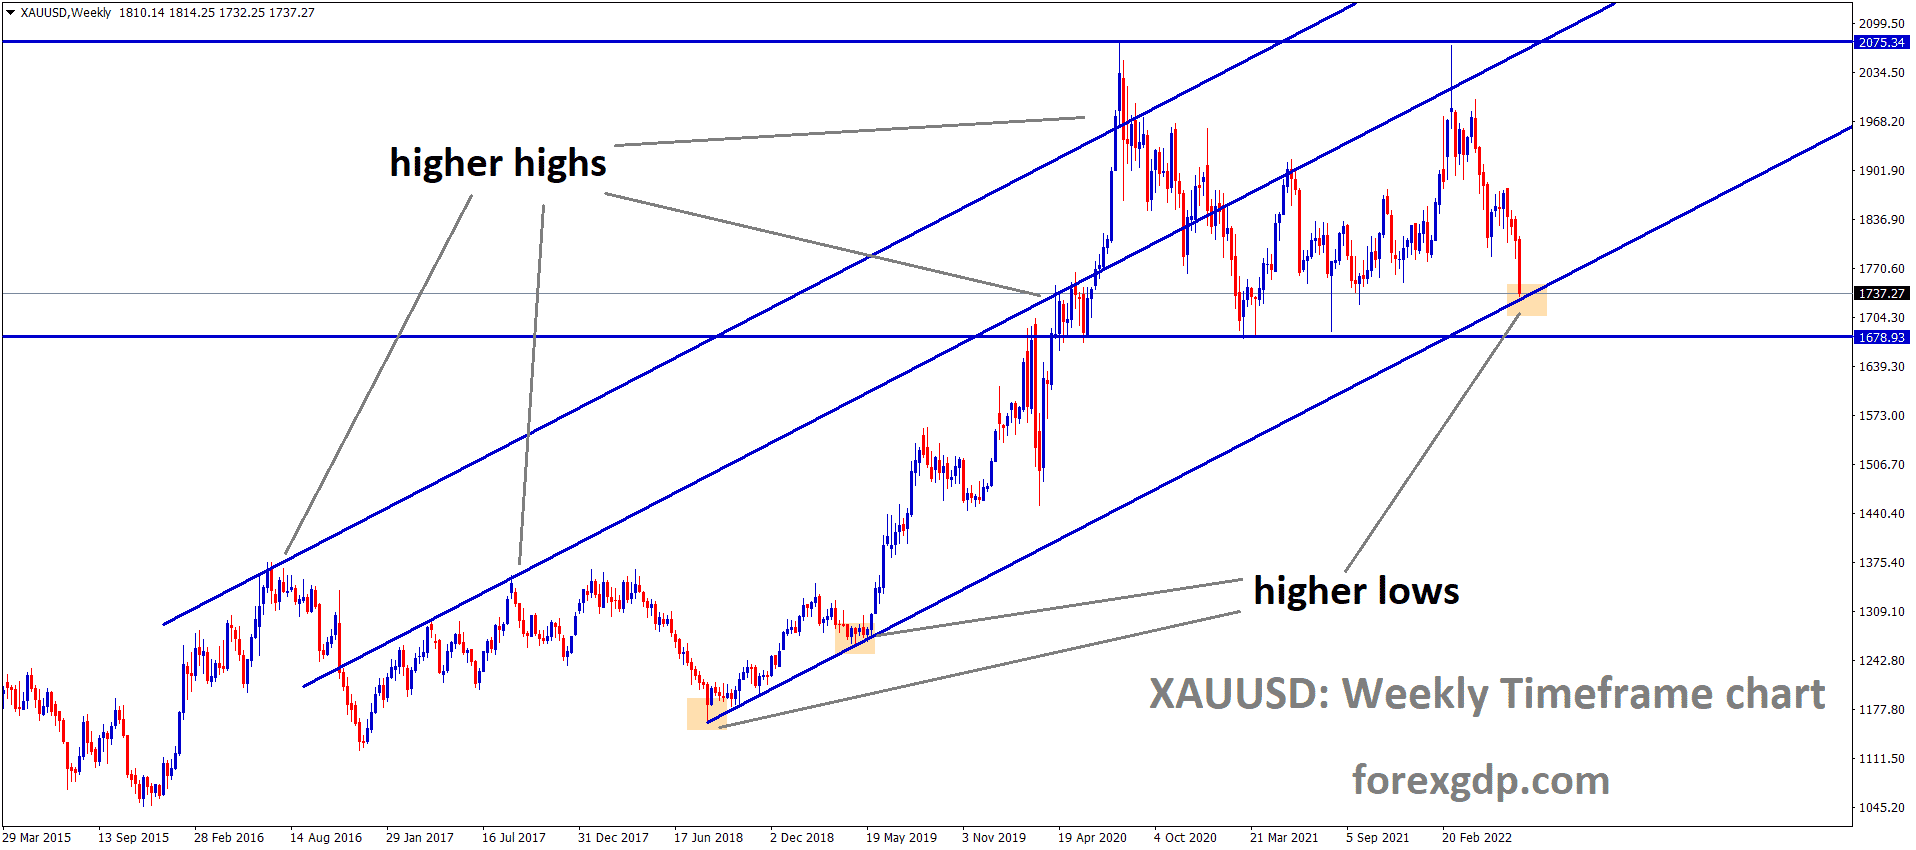 XAUUSD is moving in an Ascending channel and the market has reached the higher low area of the channel